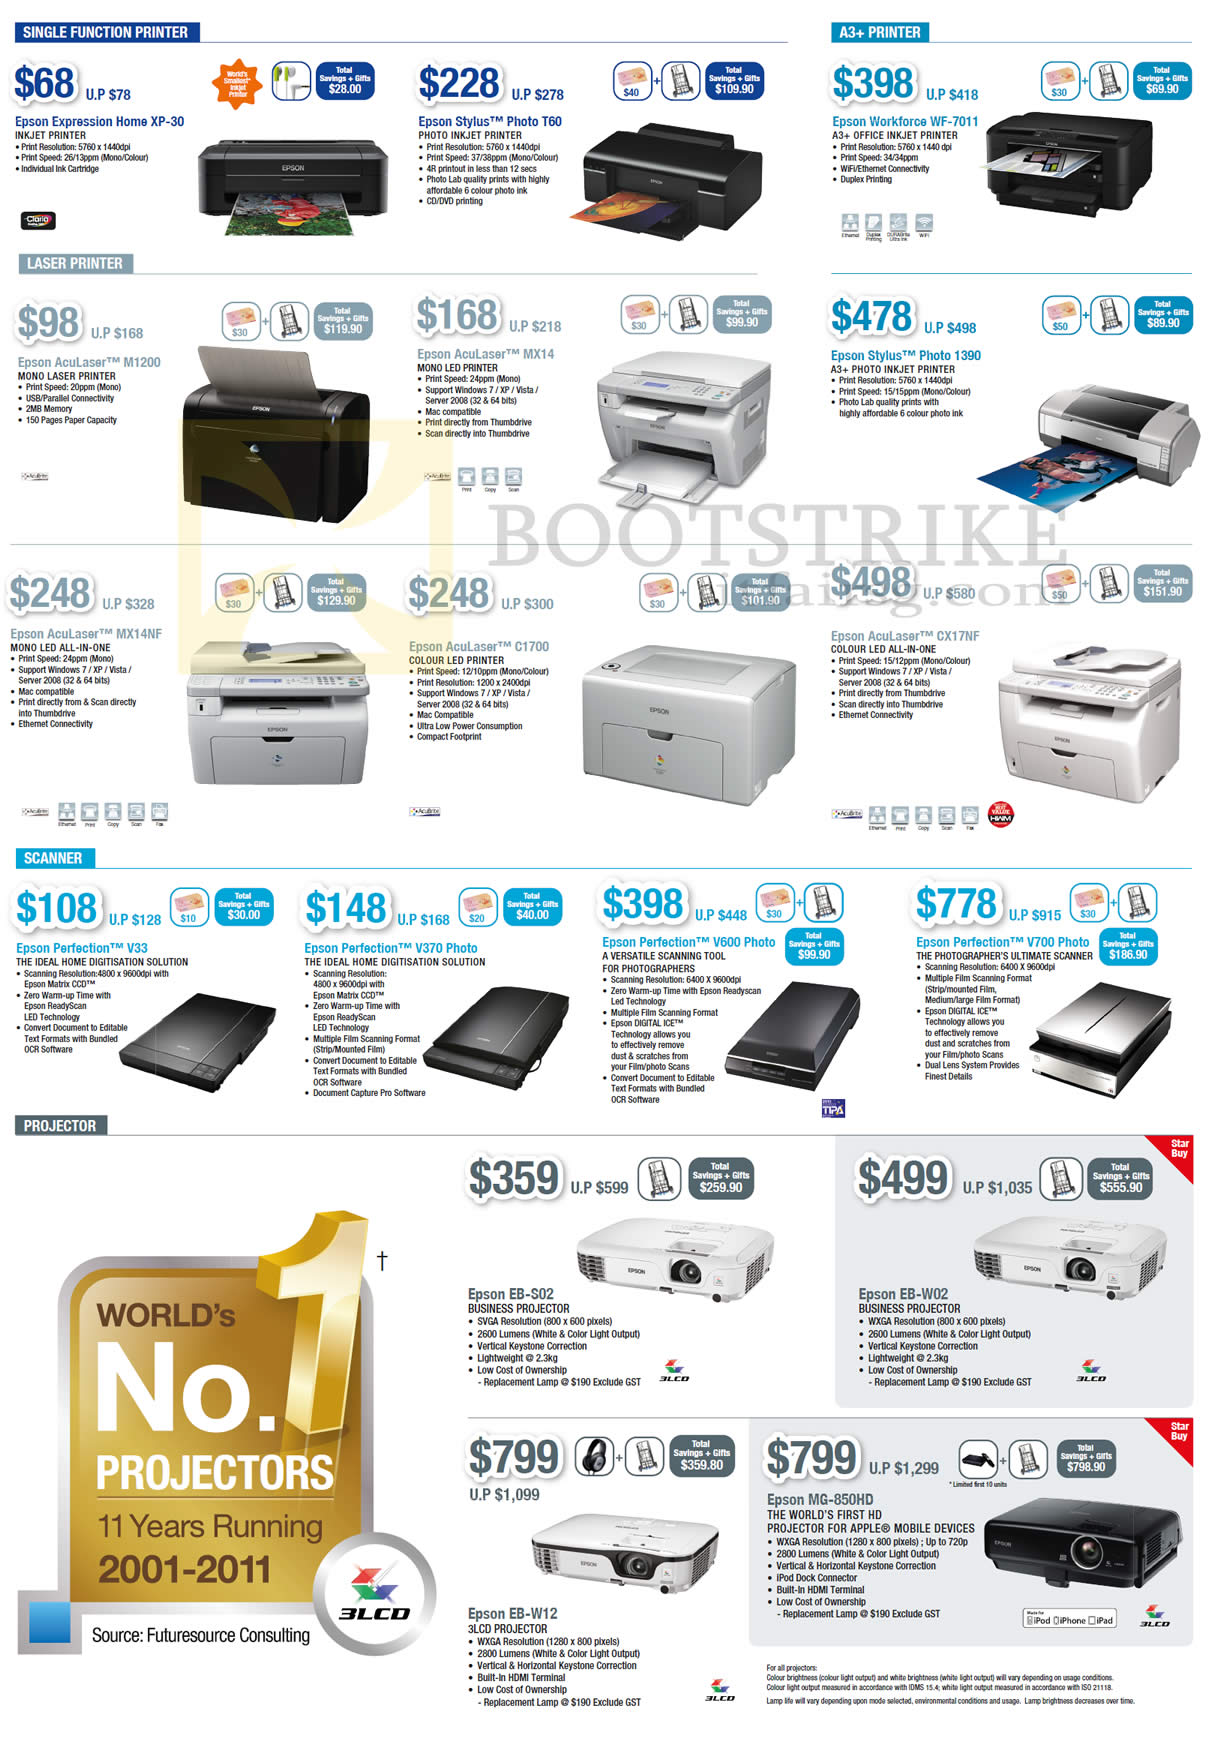 SITEX 2012 price list image brochure of Epson Printers Inkjet XP-30, Photo T60 1390, AcuLaser M1200 MX14 C1700 CX17NF MX14NF, Scanner Perfection V33 370 V600 V700, Projector EB-S02 W02 W12 MG-850HD